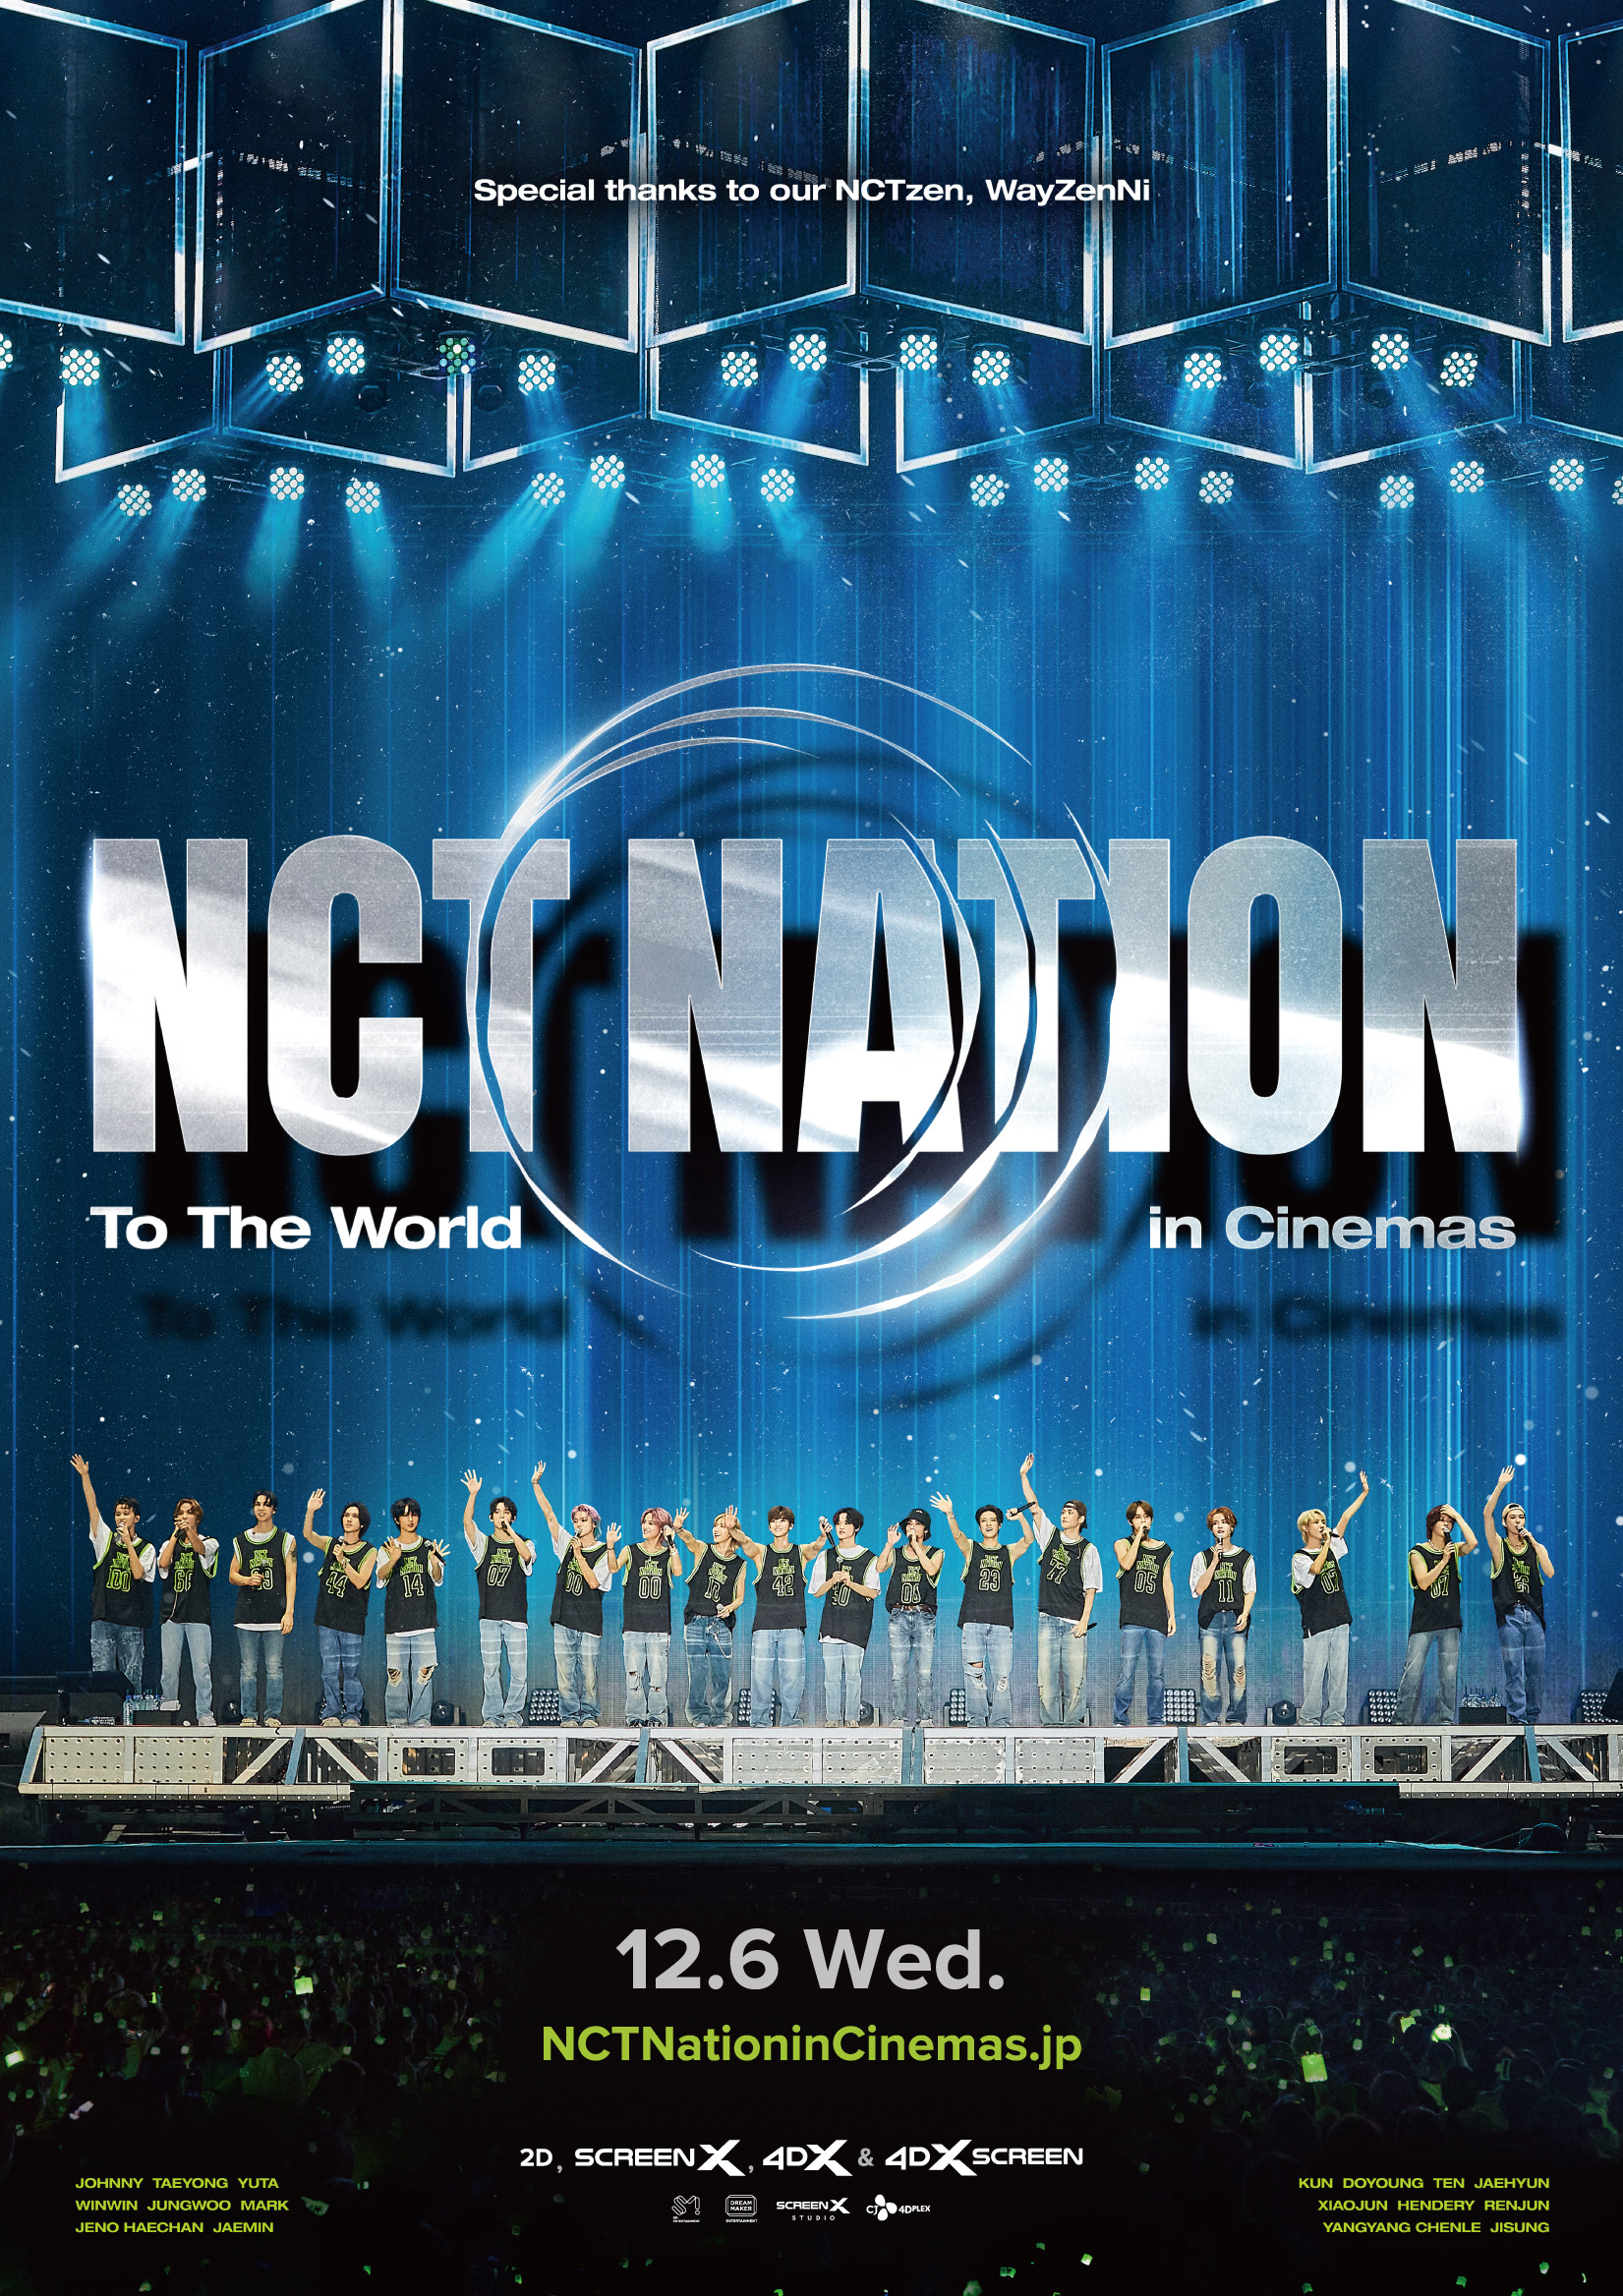 「NCT NATION : To The World in Cinemas」